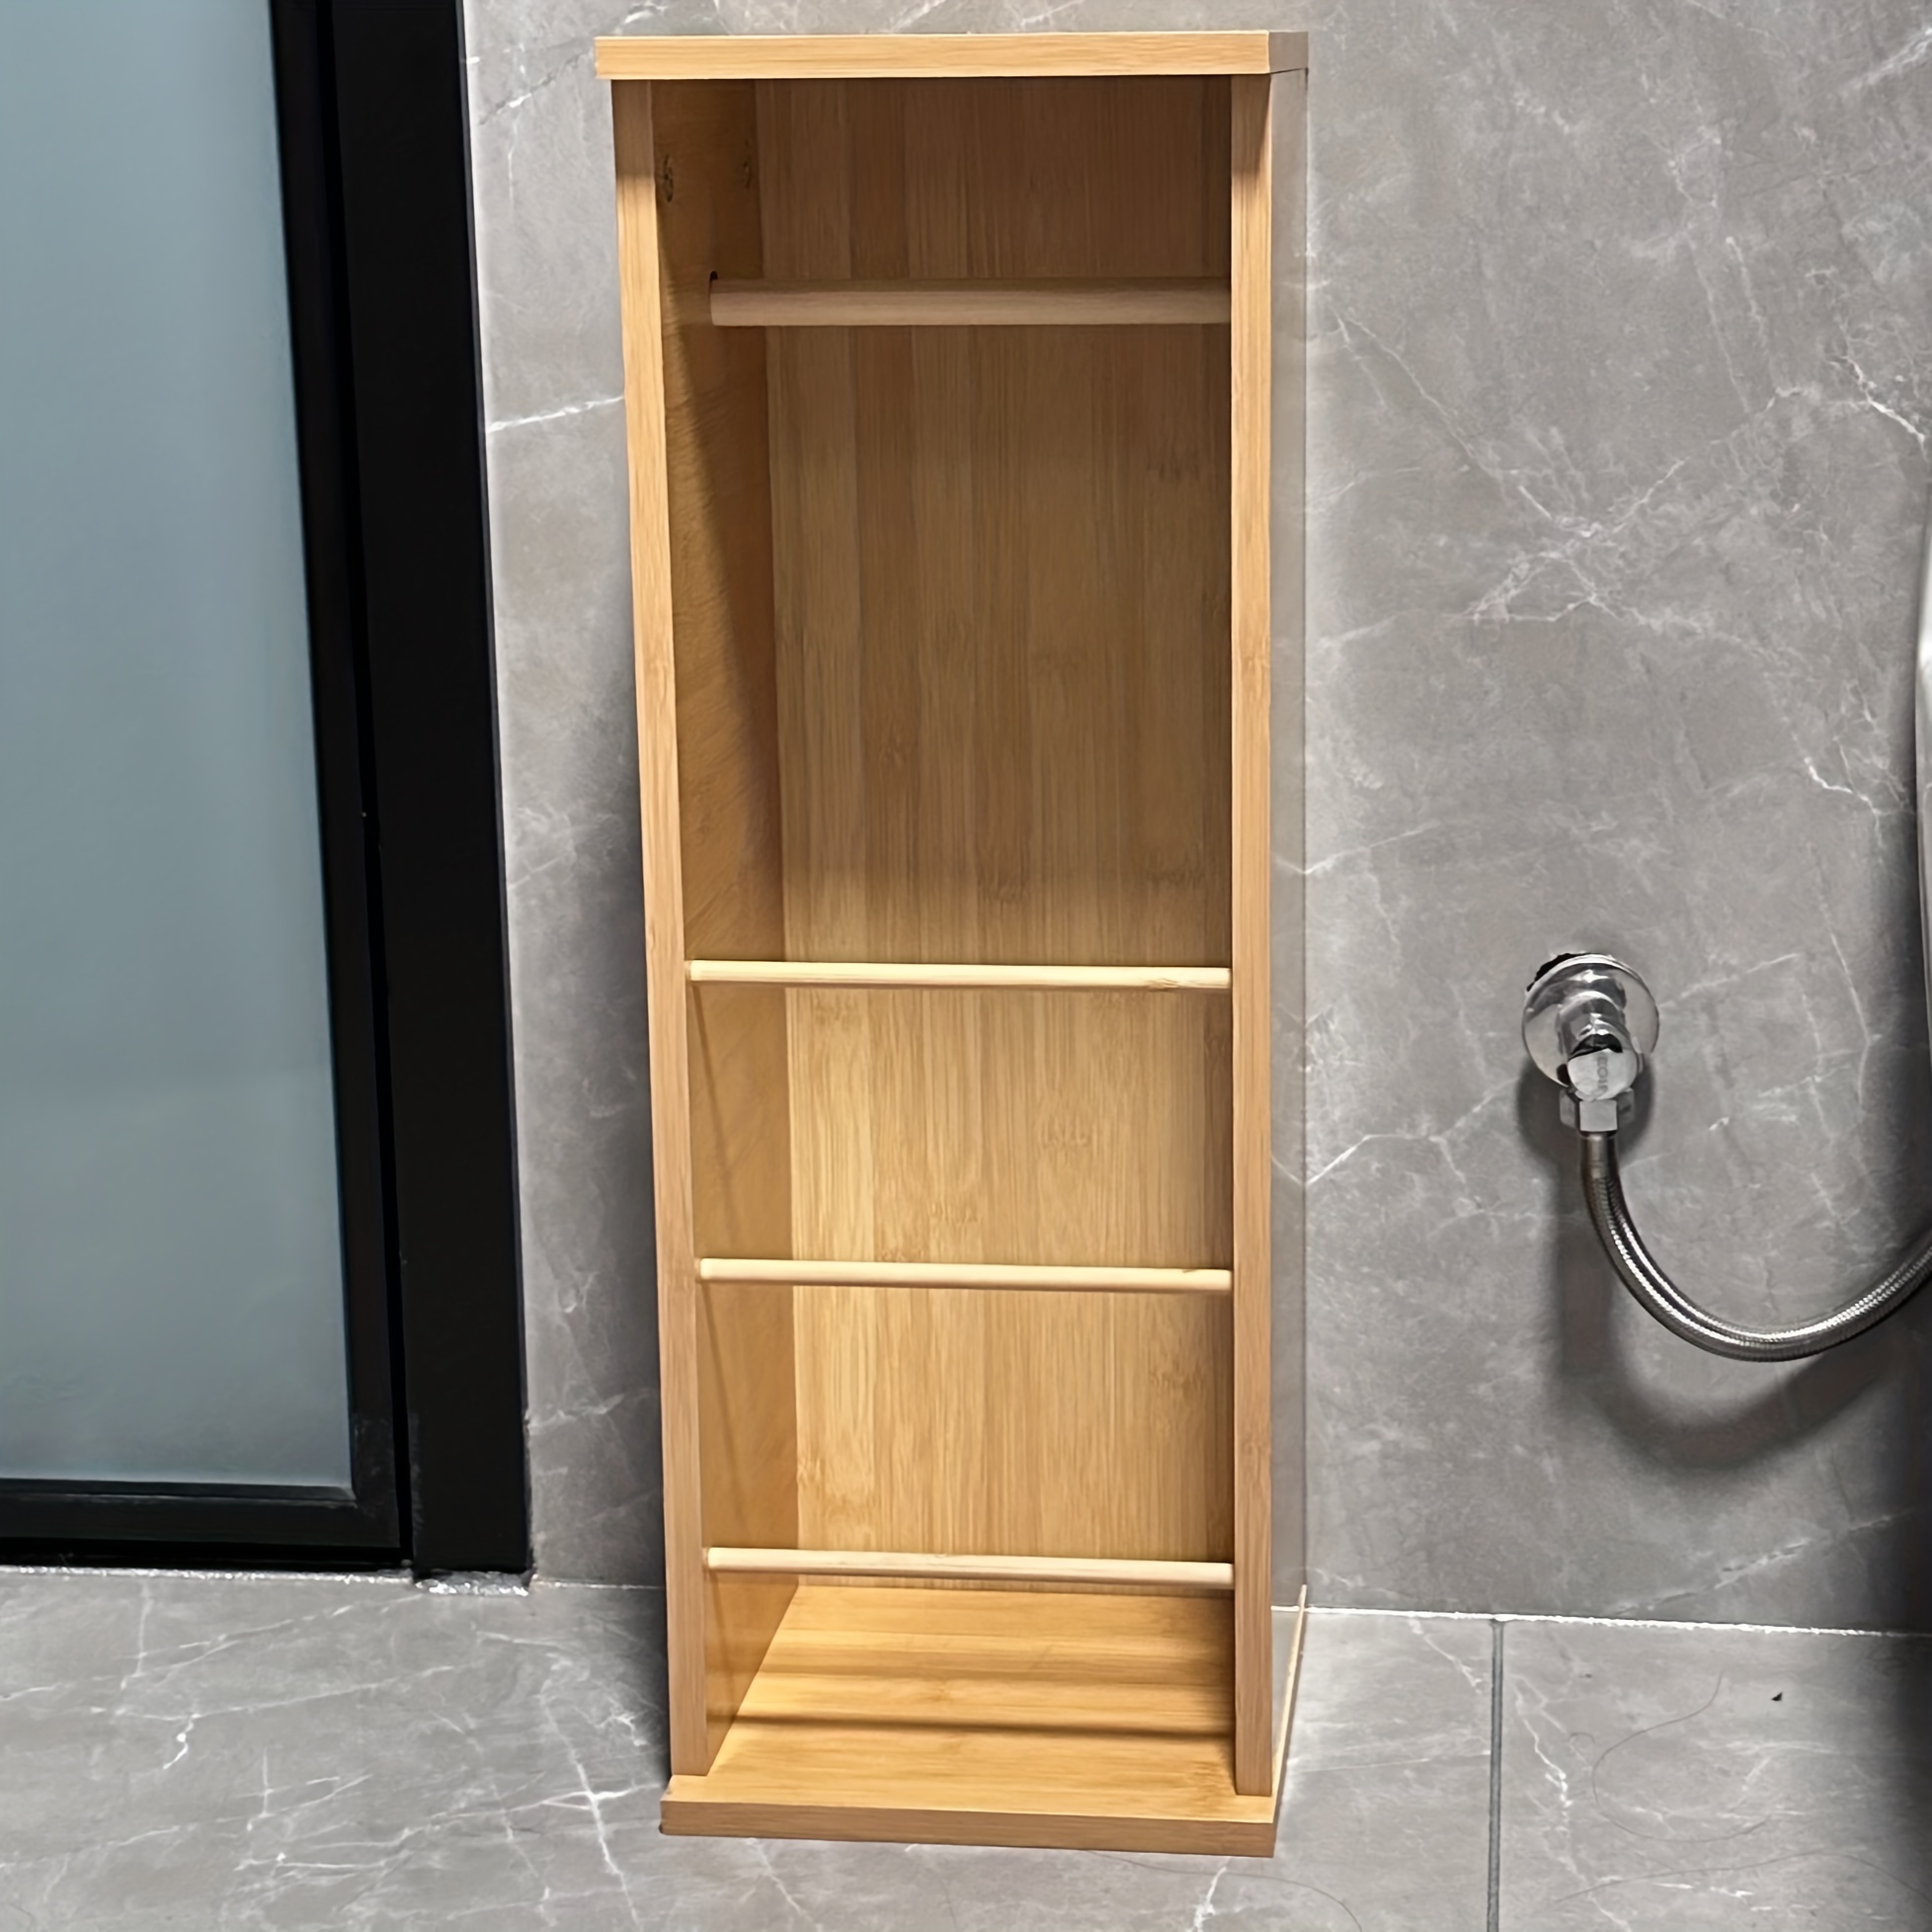 Roll Toilet Paper Holder with shelf and stand Storage Cabinet